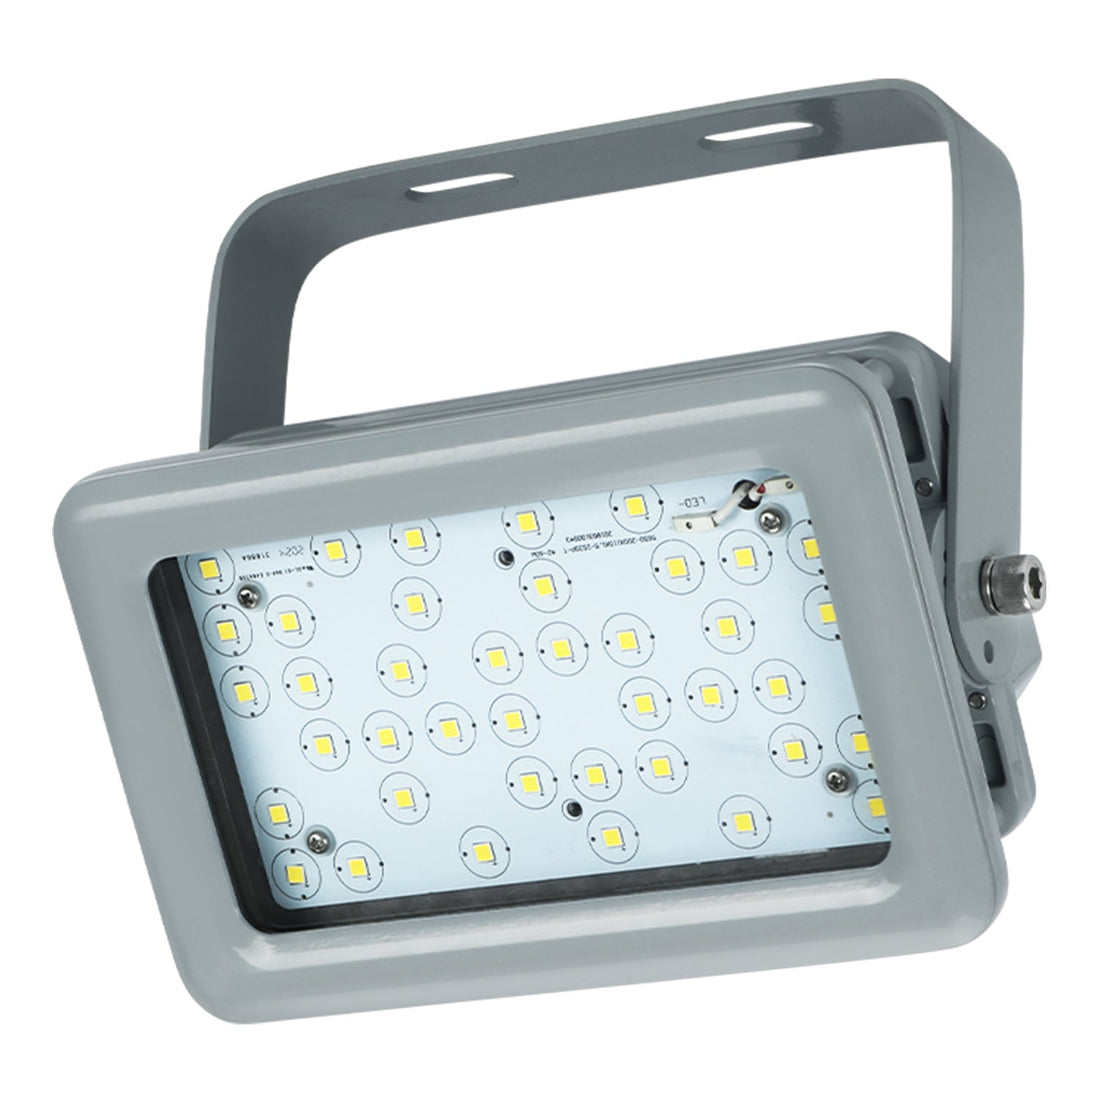 250W LED Explosion-Proof Flood Light for Hazardous Locations - Dimmable, 5000K, 35000LM, IP66 Rated